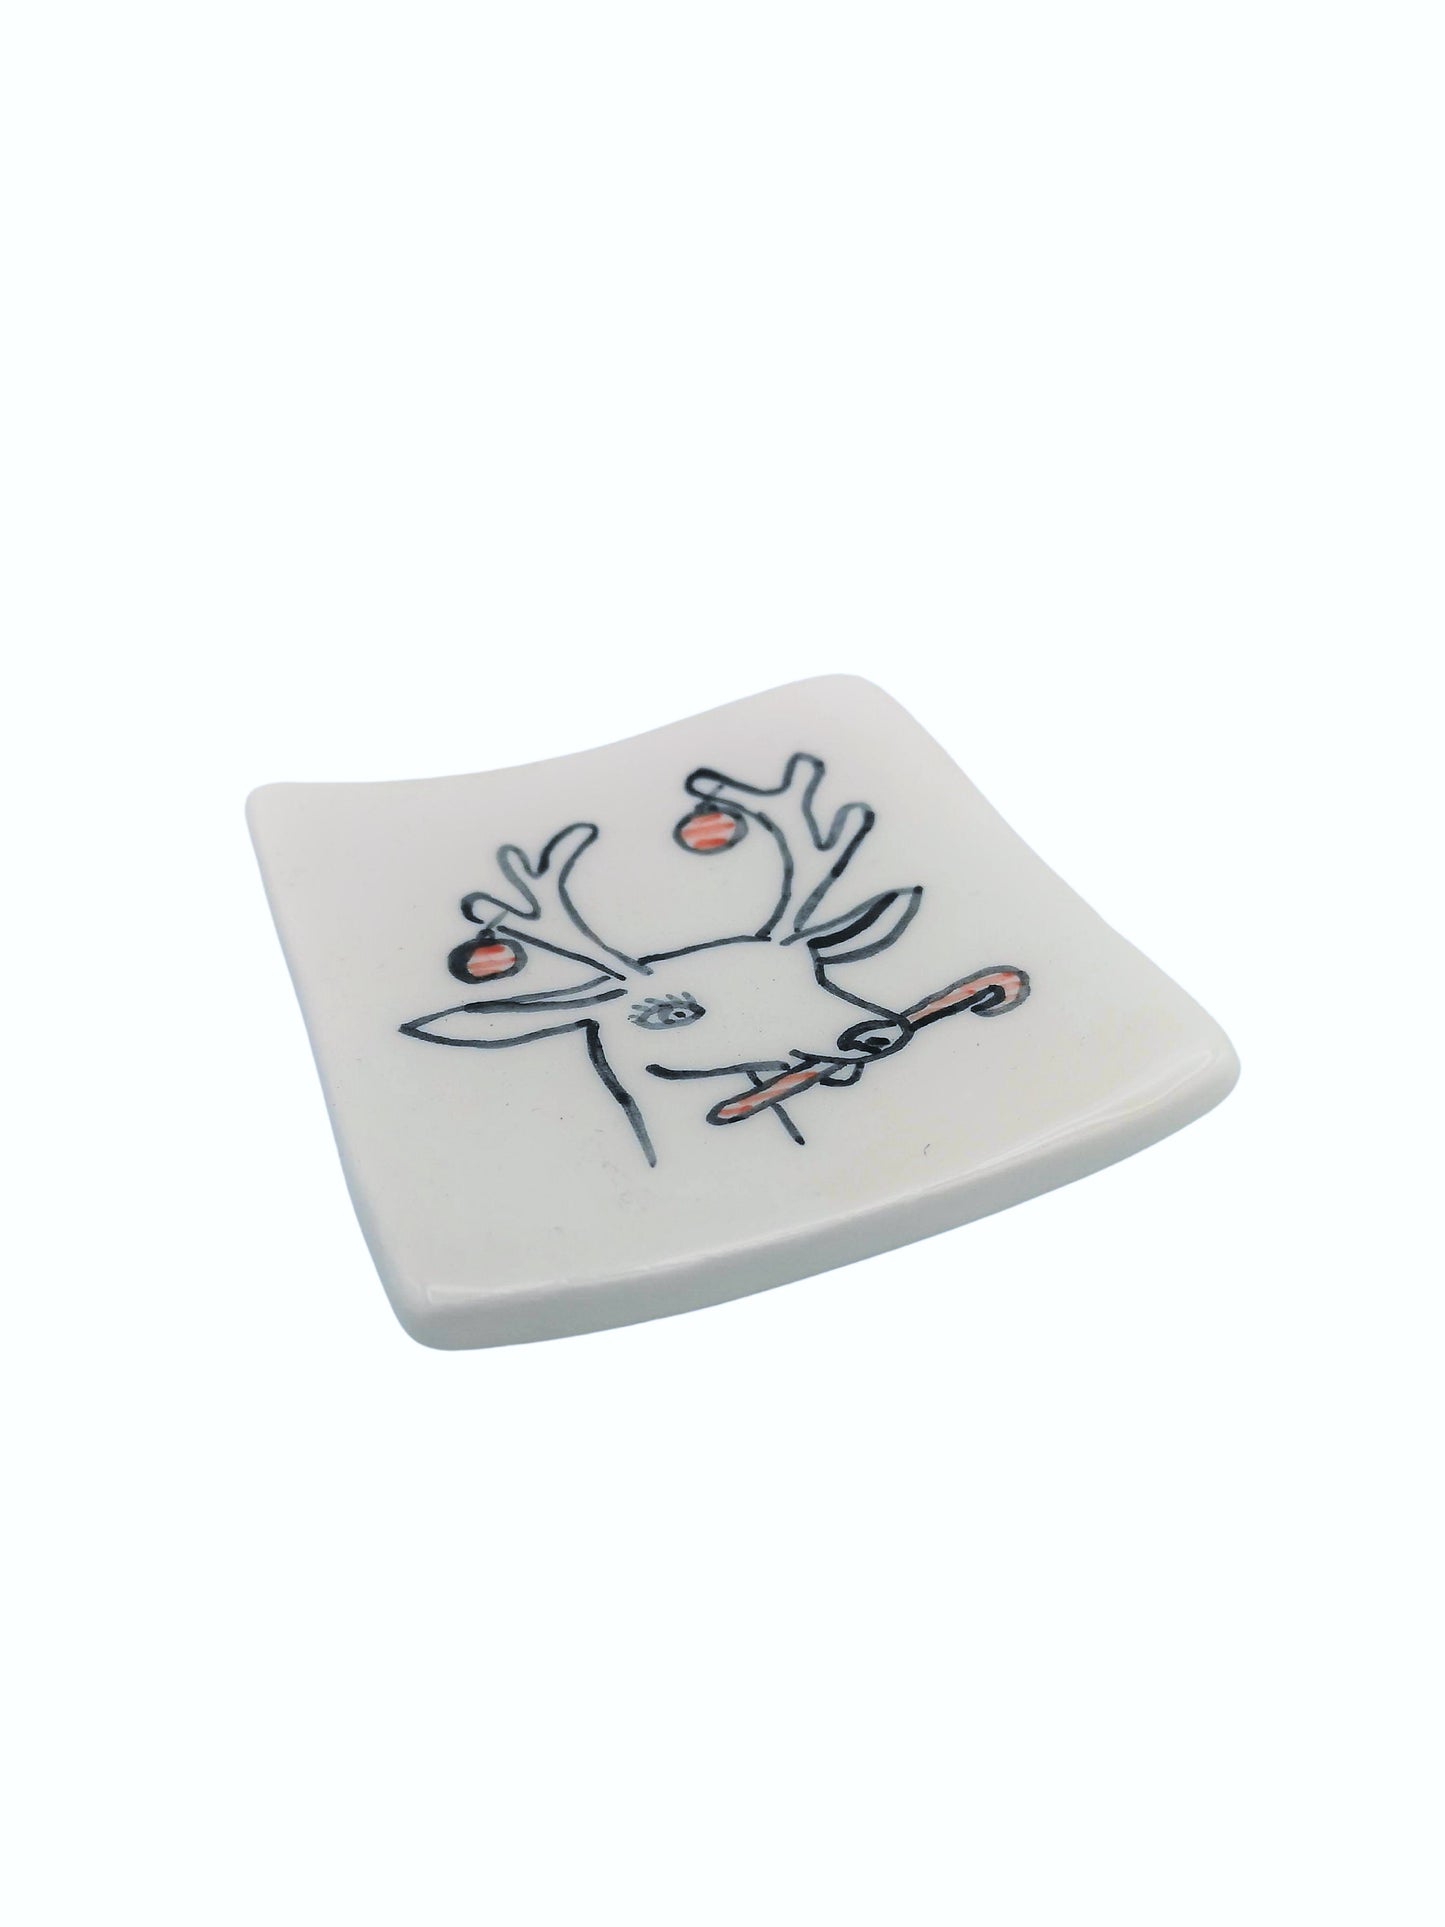 1Pc Handmade Ceramic Trinket Dish With Hand Painted Santa Claus, Holly or Reindeer, Candle Holder, Square Clay Ring Holder Best Gift For Her - Ceramica Ana Rafael